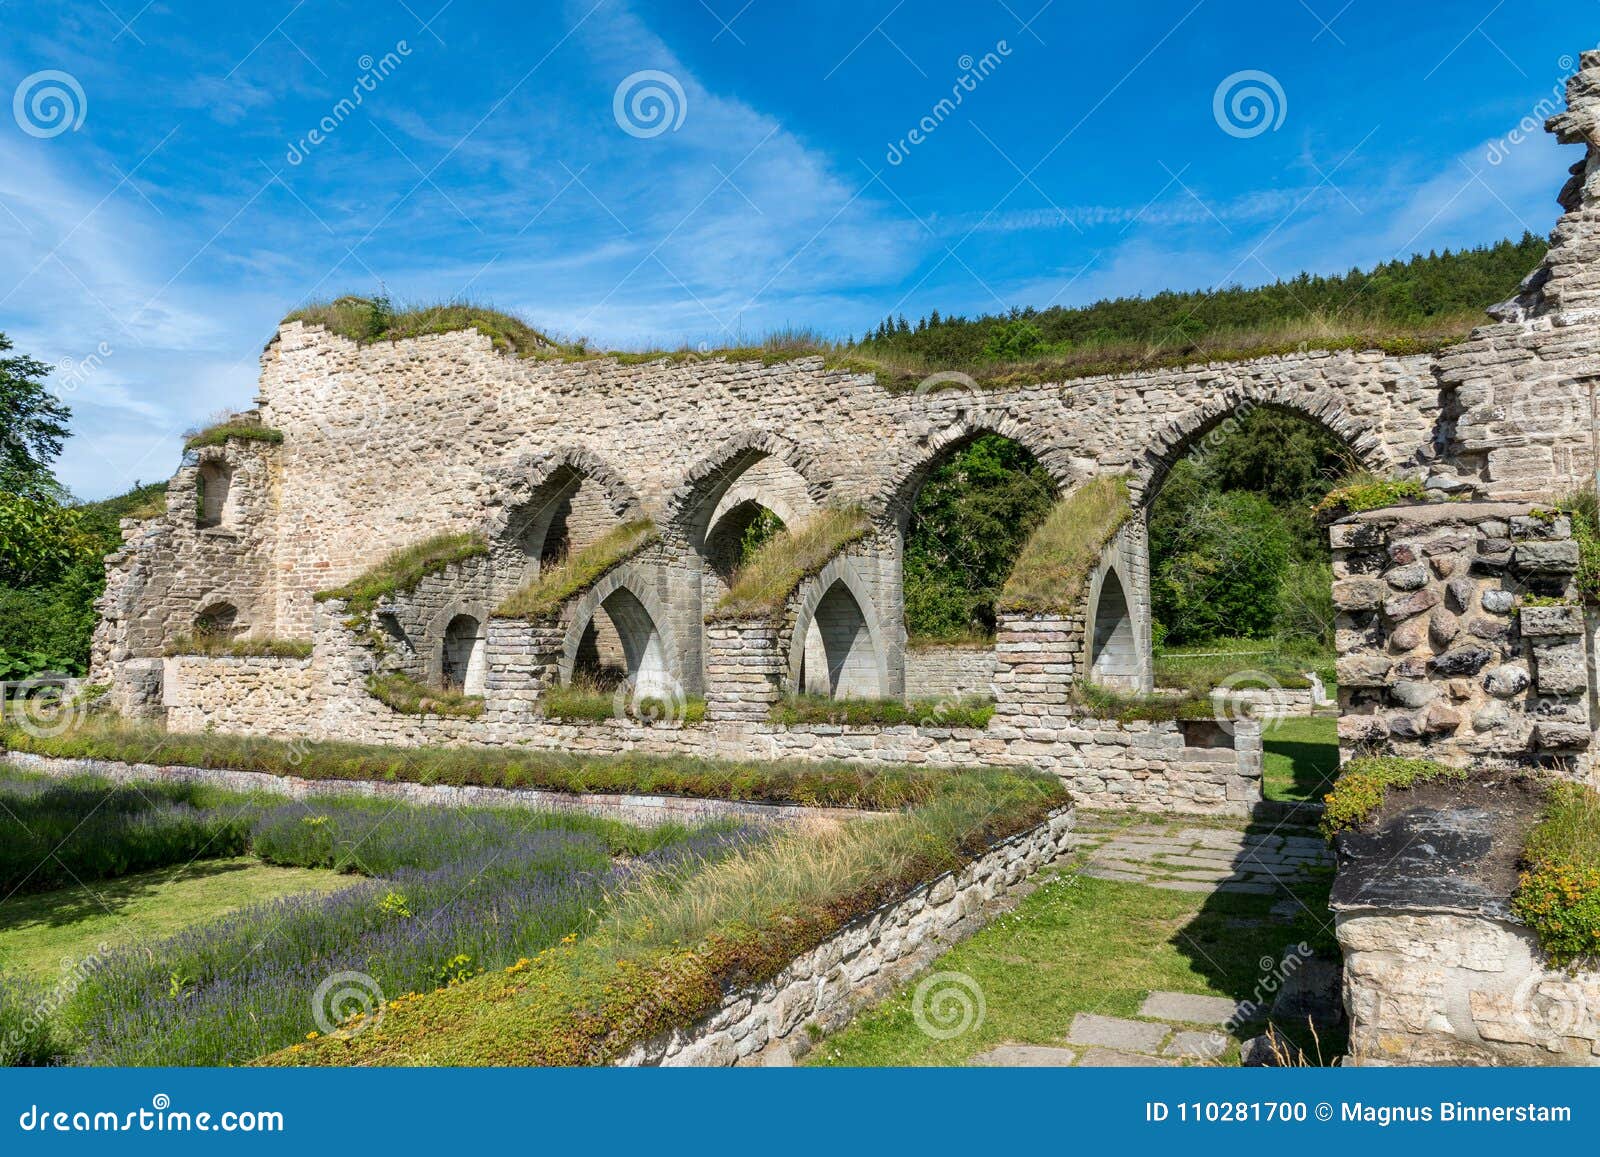 Ruin of a Medieval Monastery with Garden in Front Stock Photo - Image